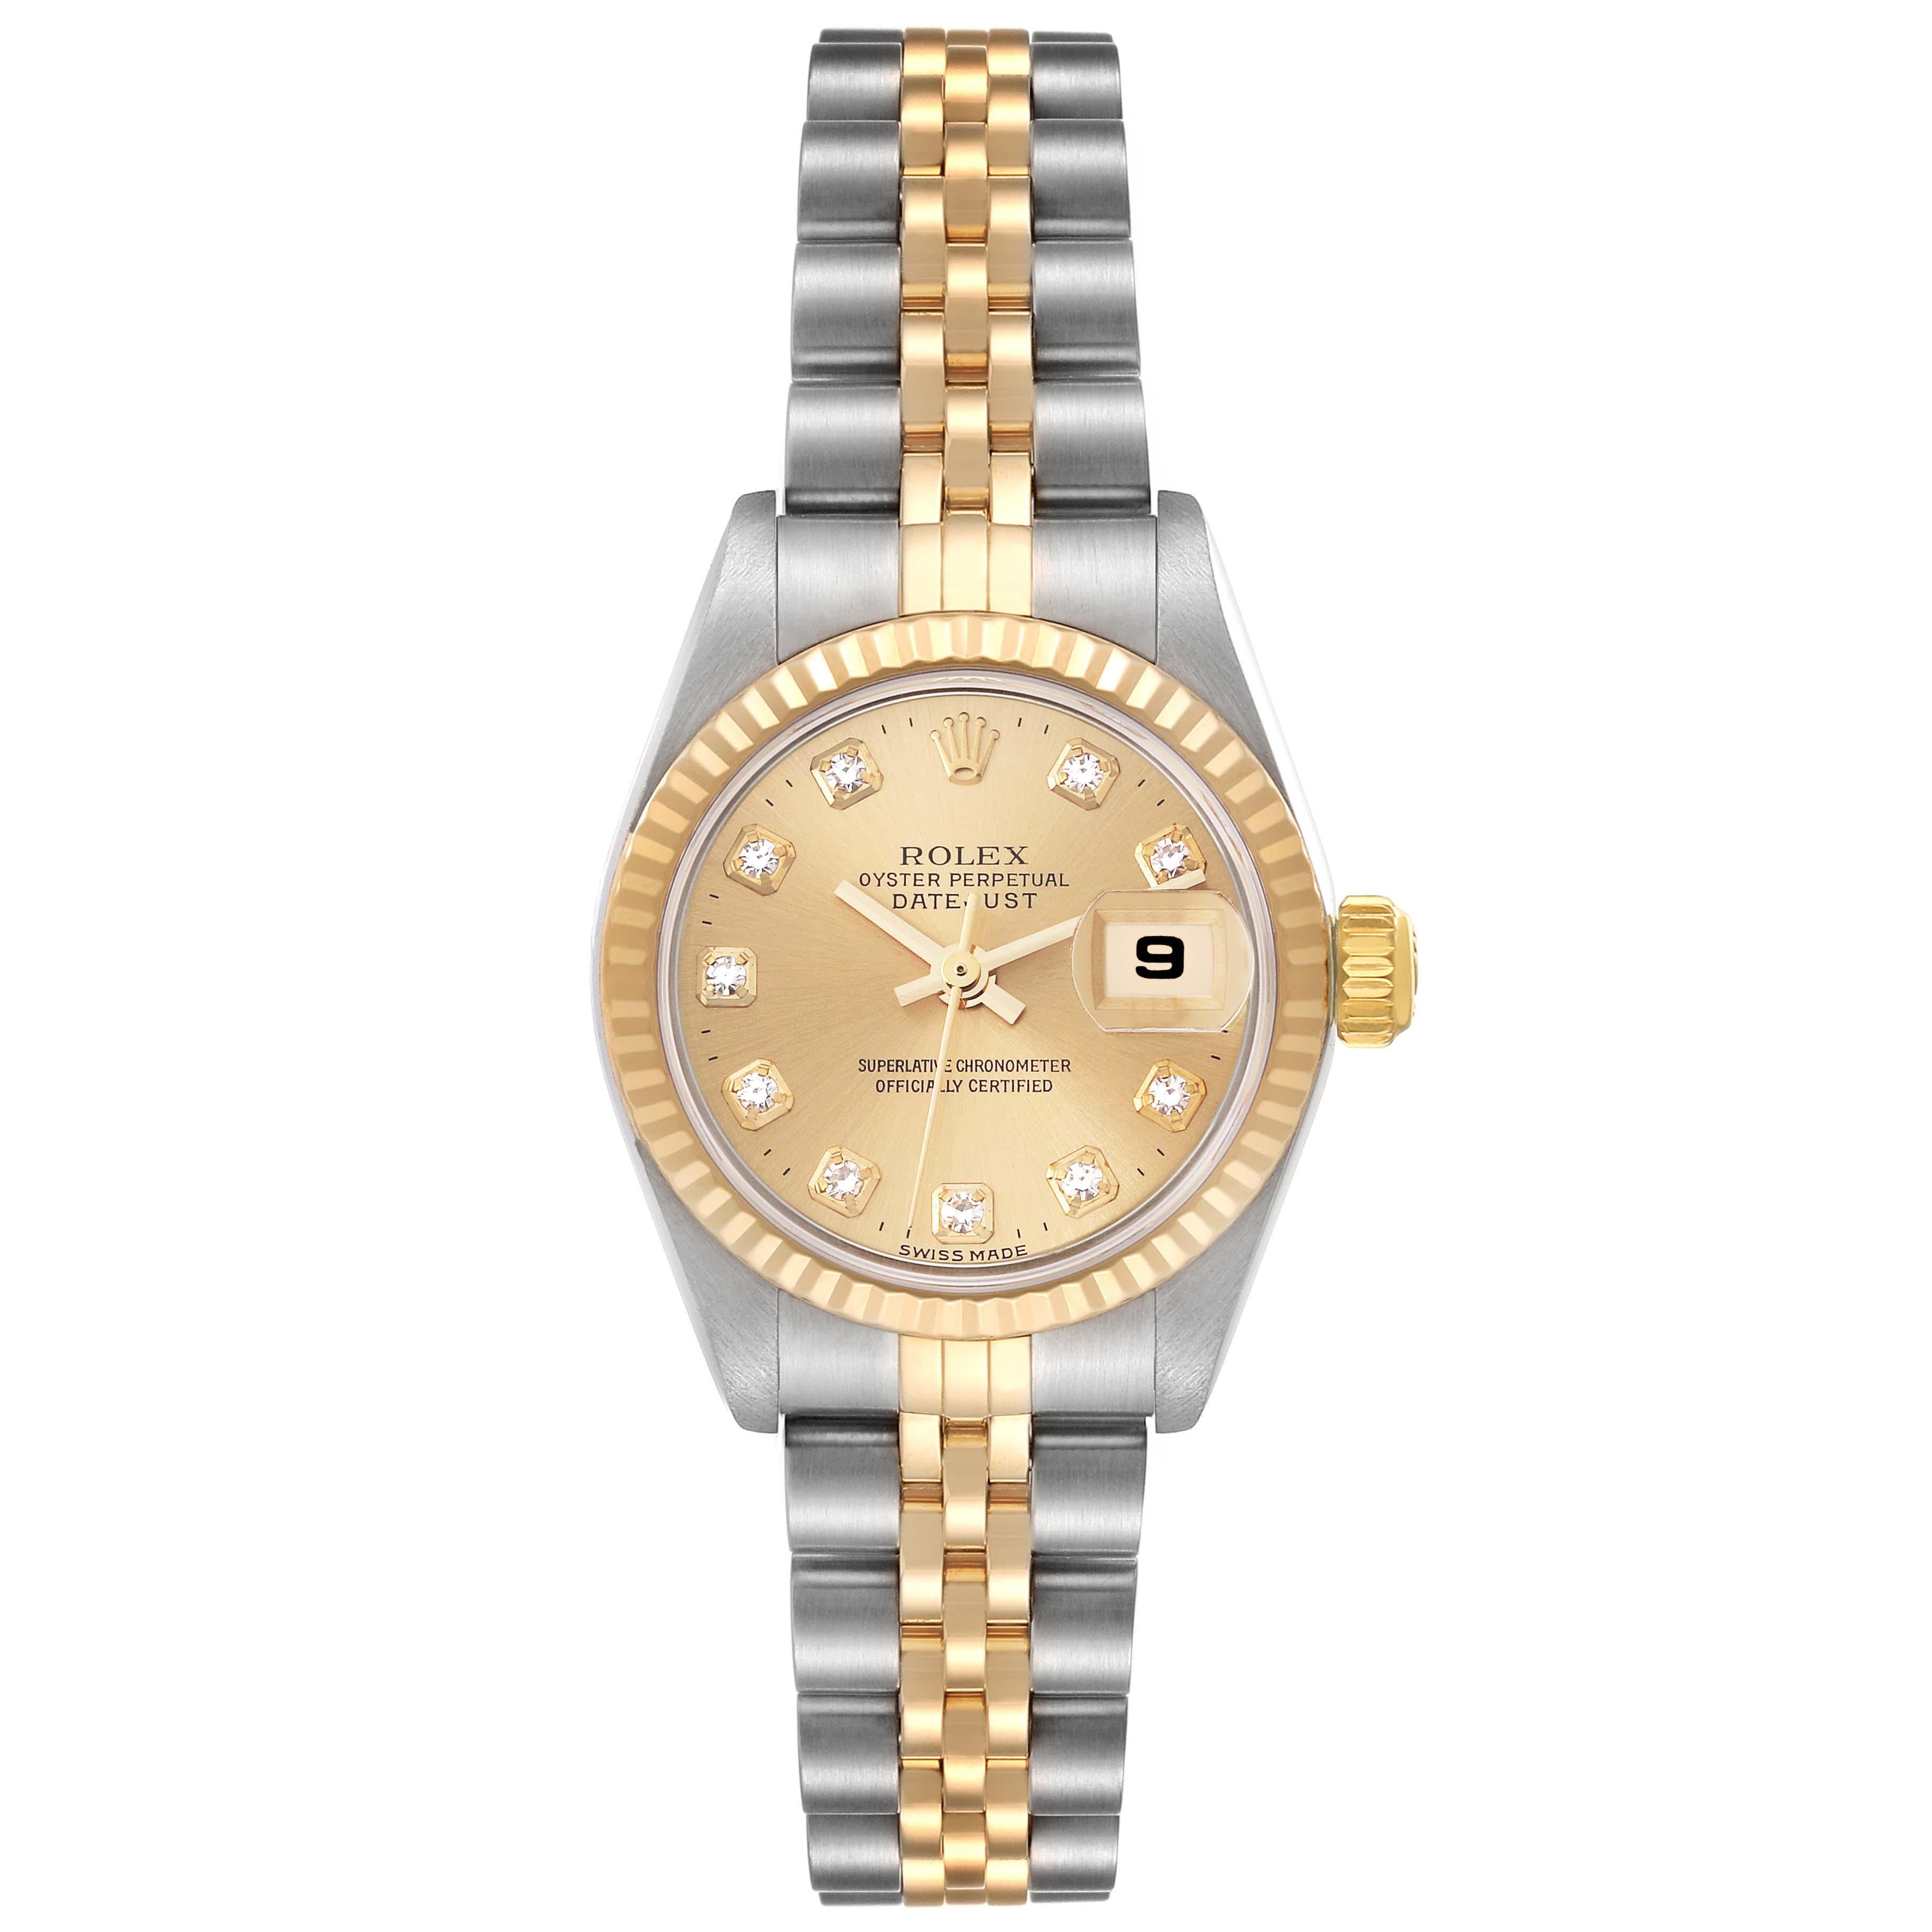 Rolex Datejust Steel Yellow Gold Champagne Diamond Dial Ladies Watch 79173. Officially certified chronometer automatic self-winding movement. Stainless steel oyster case 26.0 mm in diameter. Rolex logo on an 18K yellow gold crown. 18k yellow gold